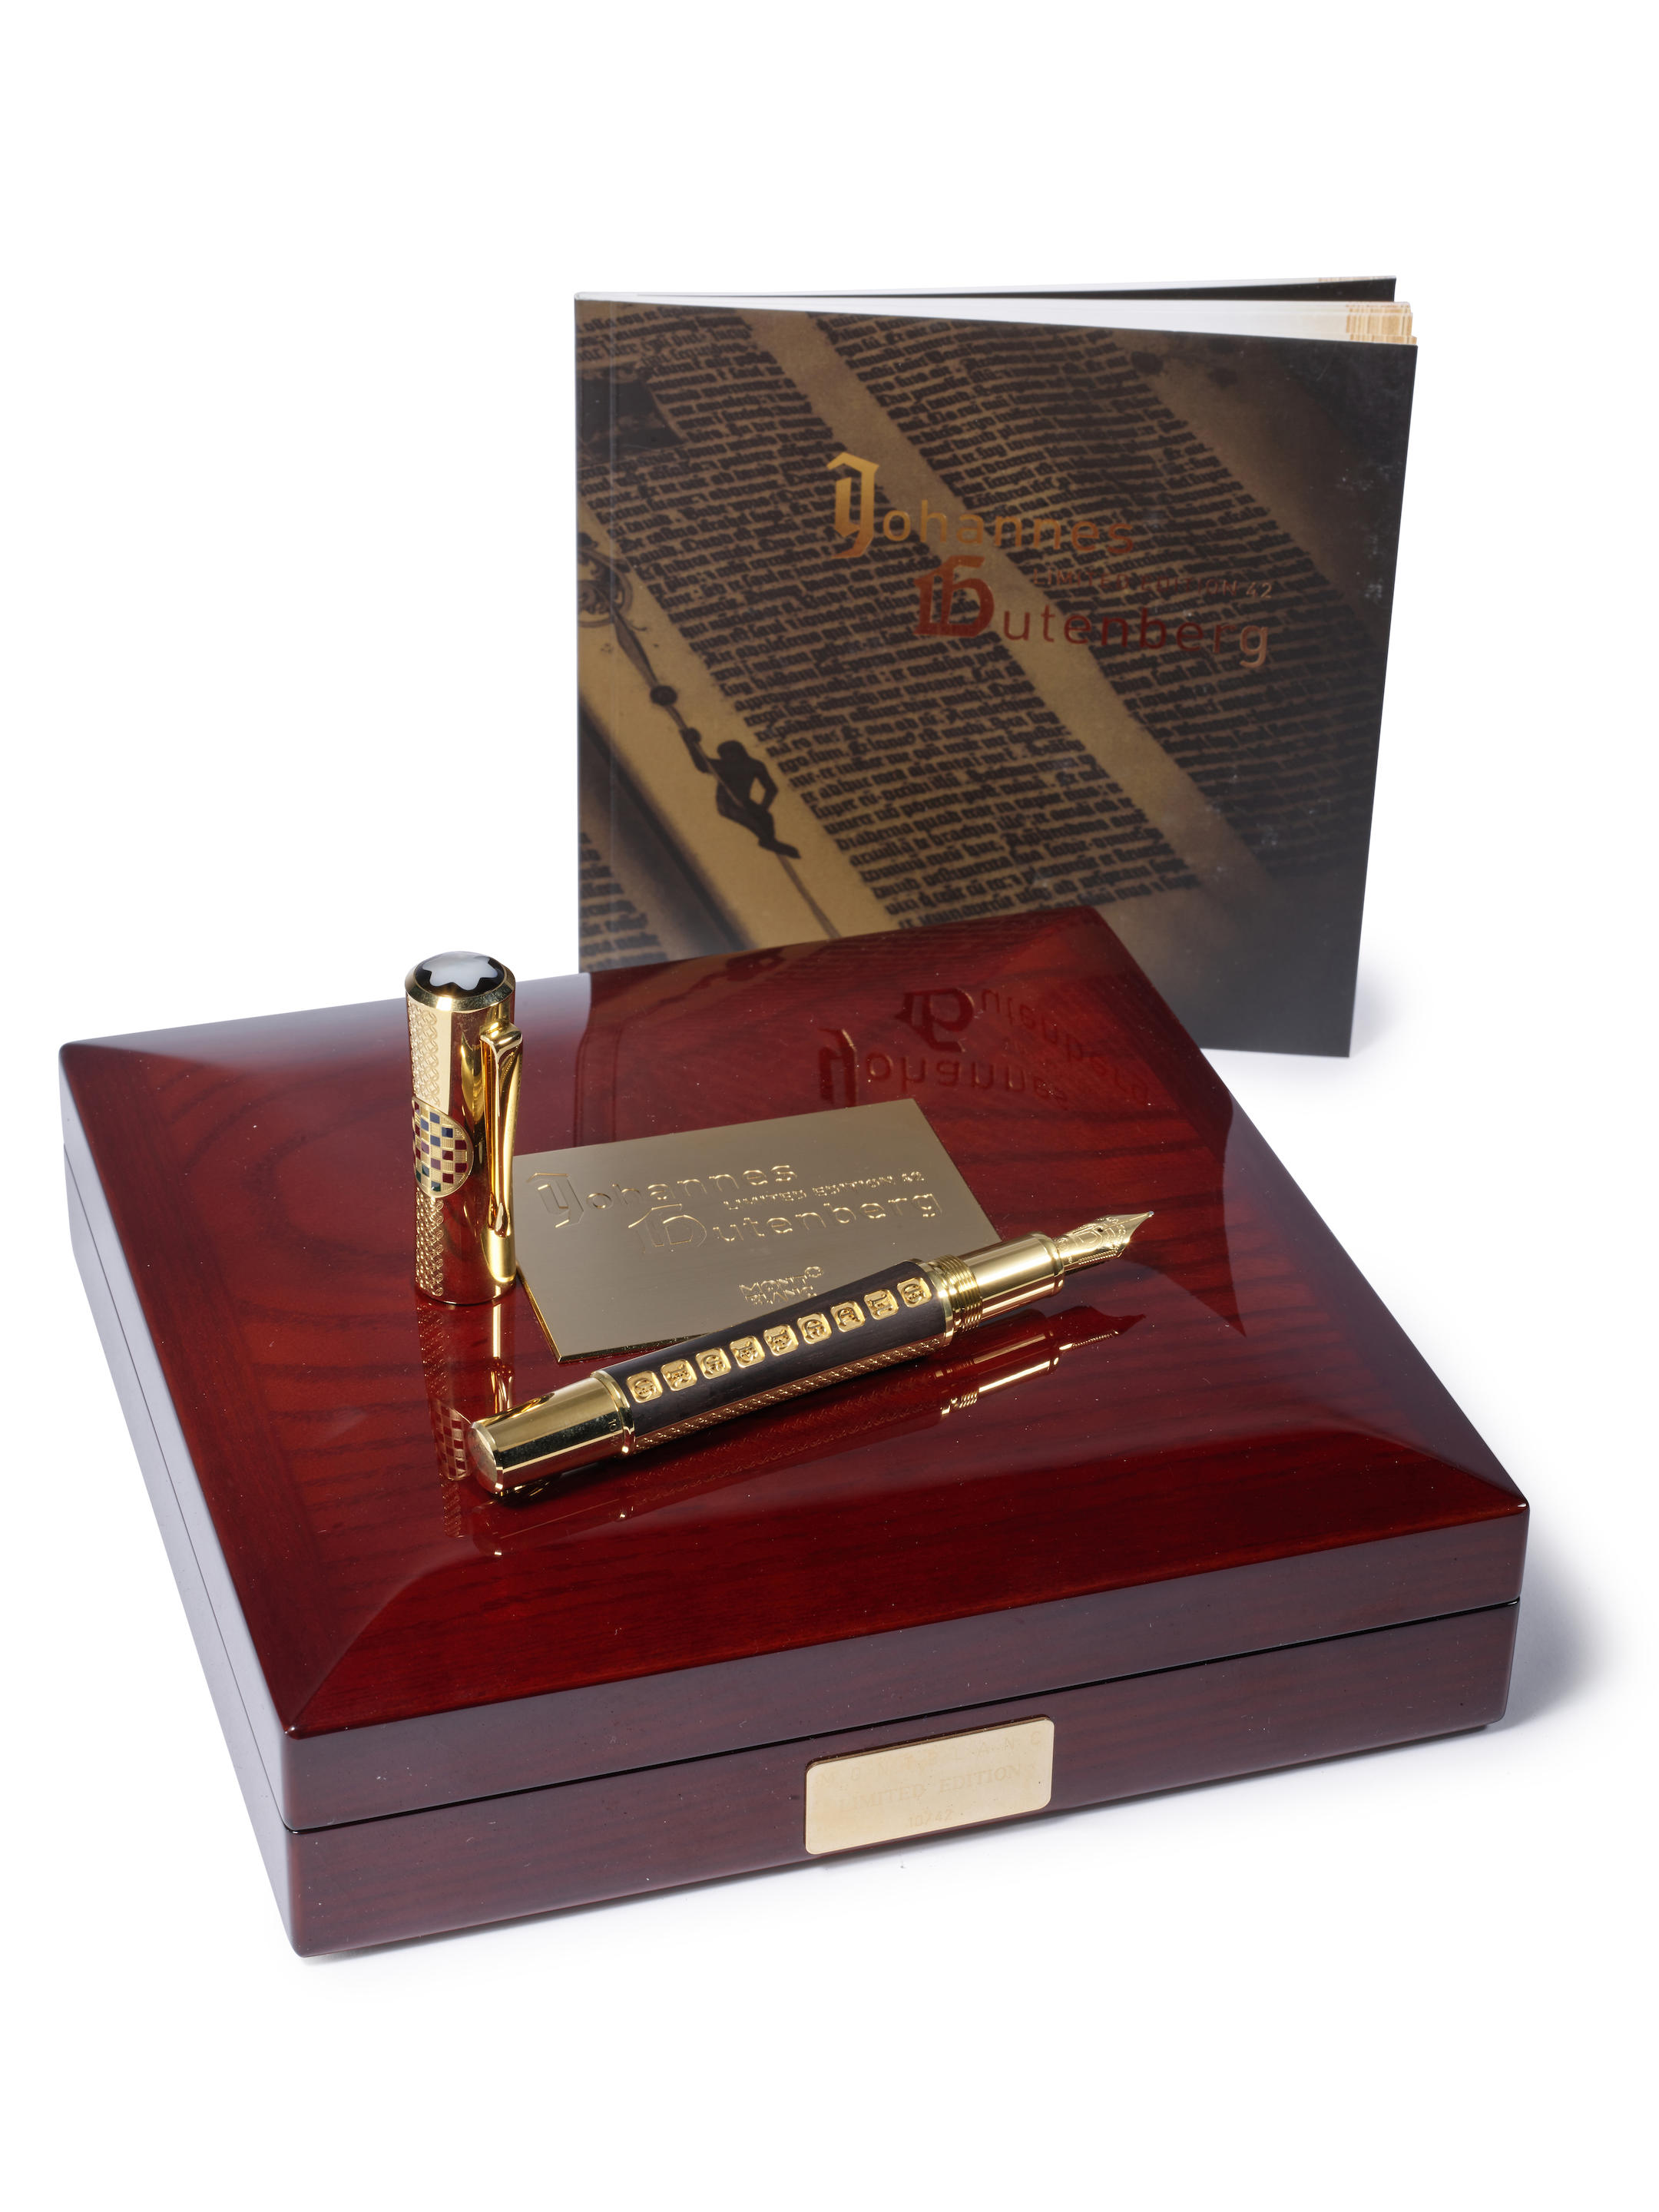 HERMÈS TWO-TONED ROUGE SELLIER TOGO AND SWIFT 24/24 WITH GOLD HARDWARE  (Includes original dust bags) - Bonhams